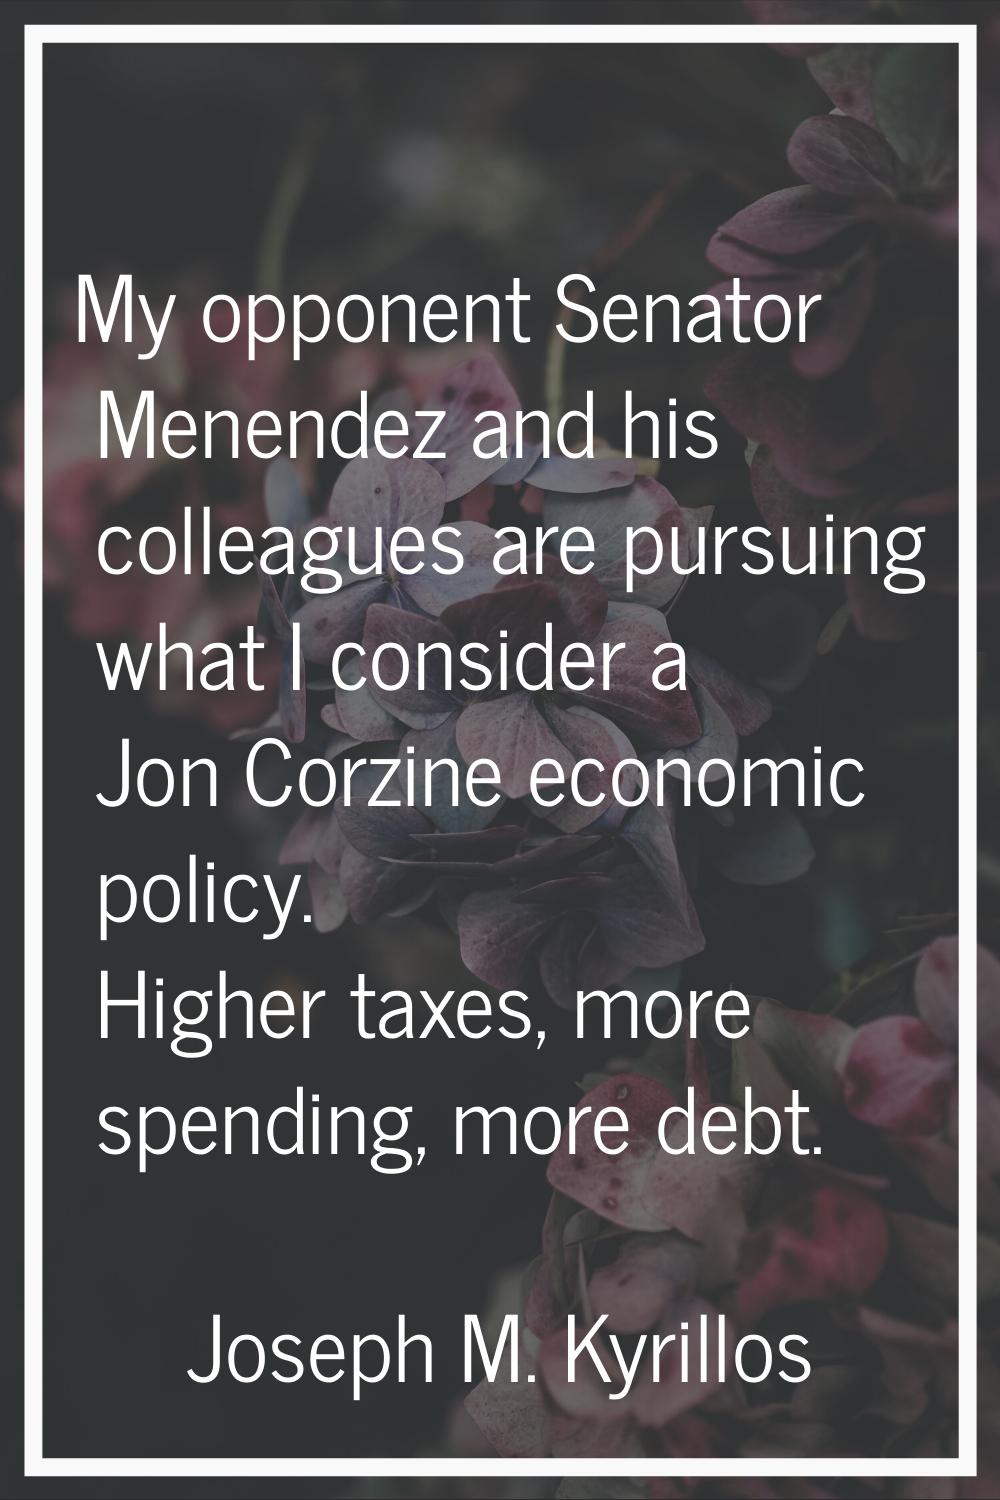 My opponent Senator Menendez and his colleagues are pursuing what I consider a Jon Corzine economic